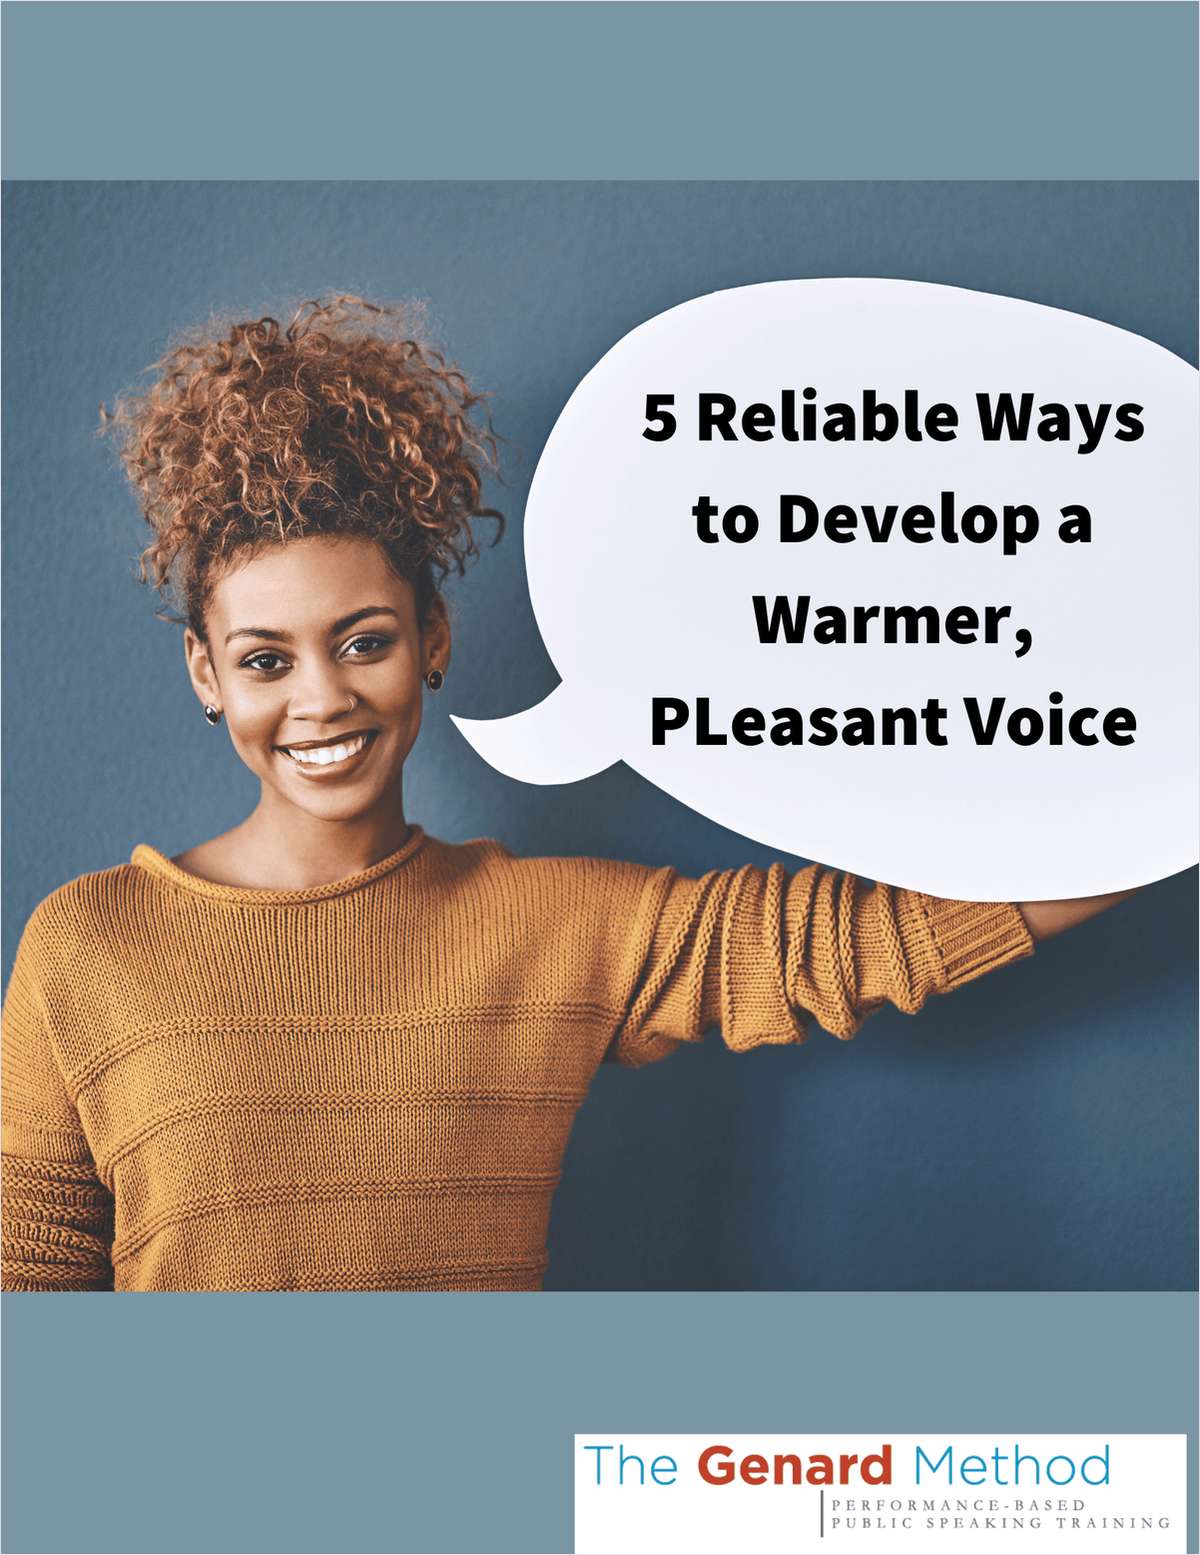 w thab116c8 - 5  Reliable Ways to Develop a Warmer, Pleasant Voice